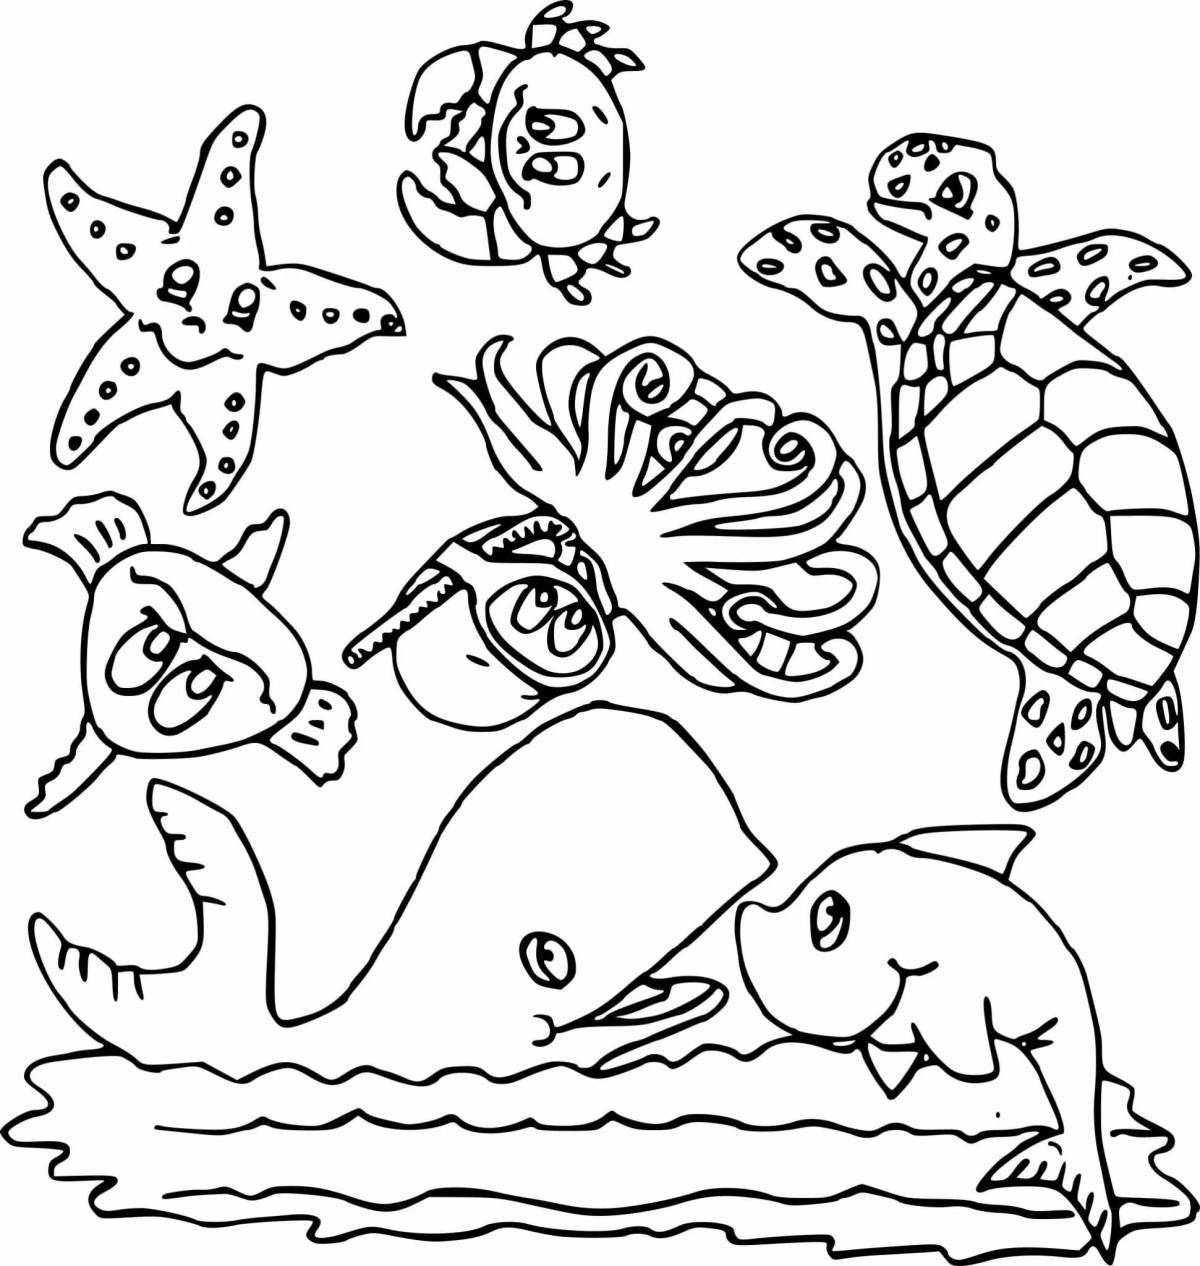 Playful underwater world coloring page